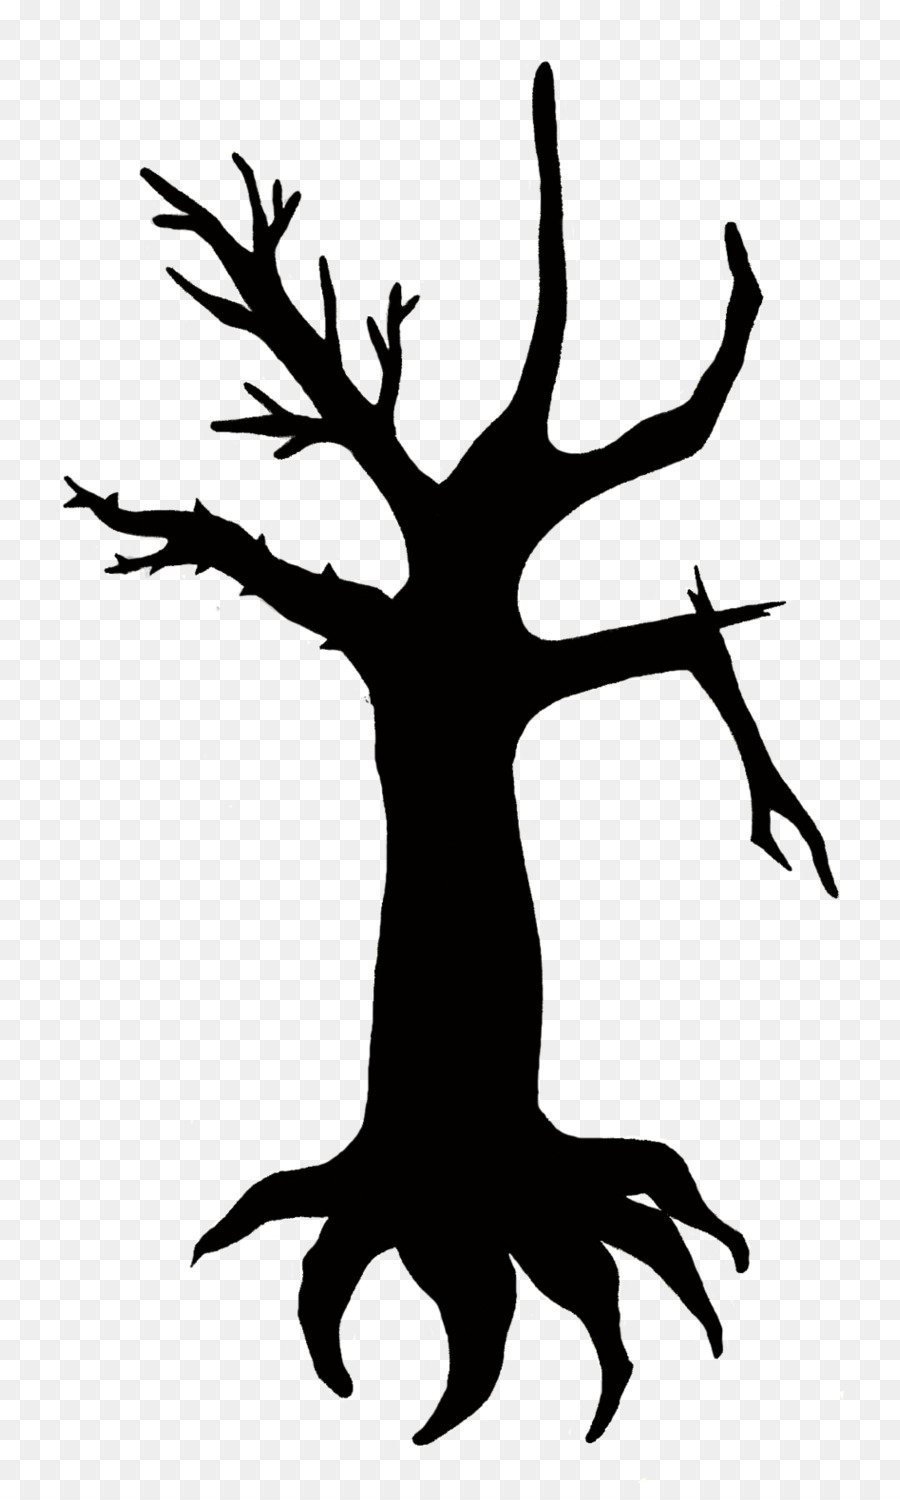 Silhouette Tree Root Clip art - Silhouette png download - 855*1483 - Free Transparent Silhouette png Download.